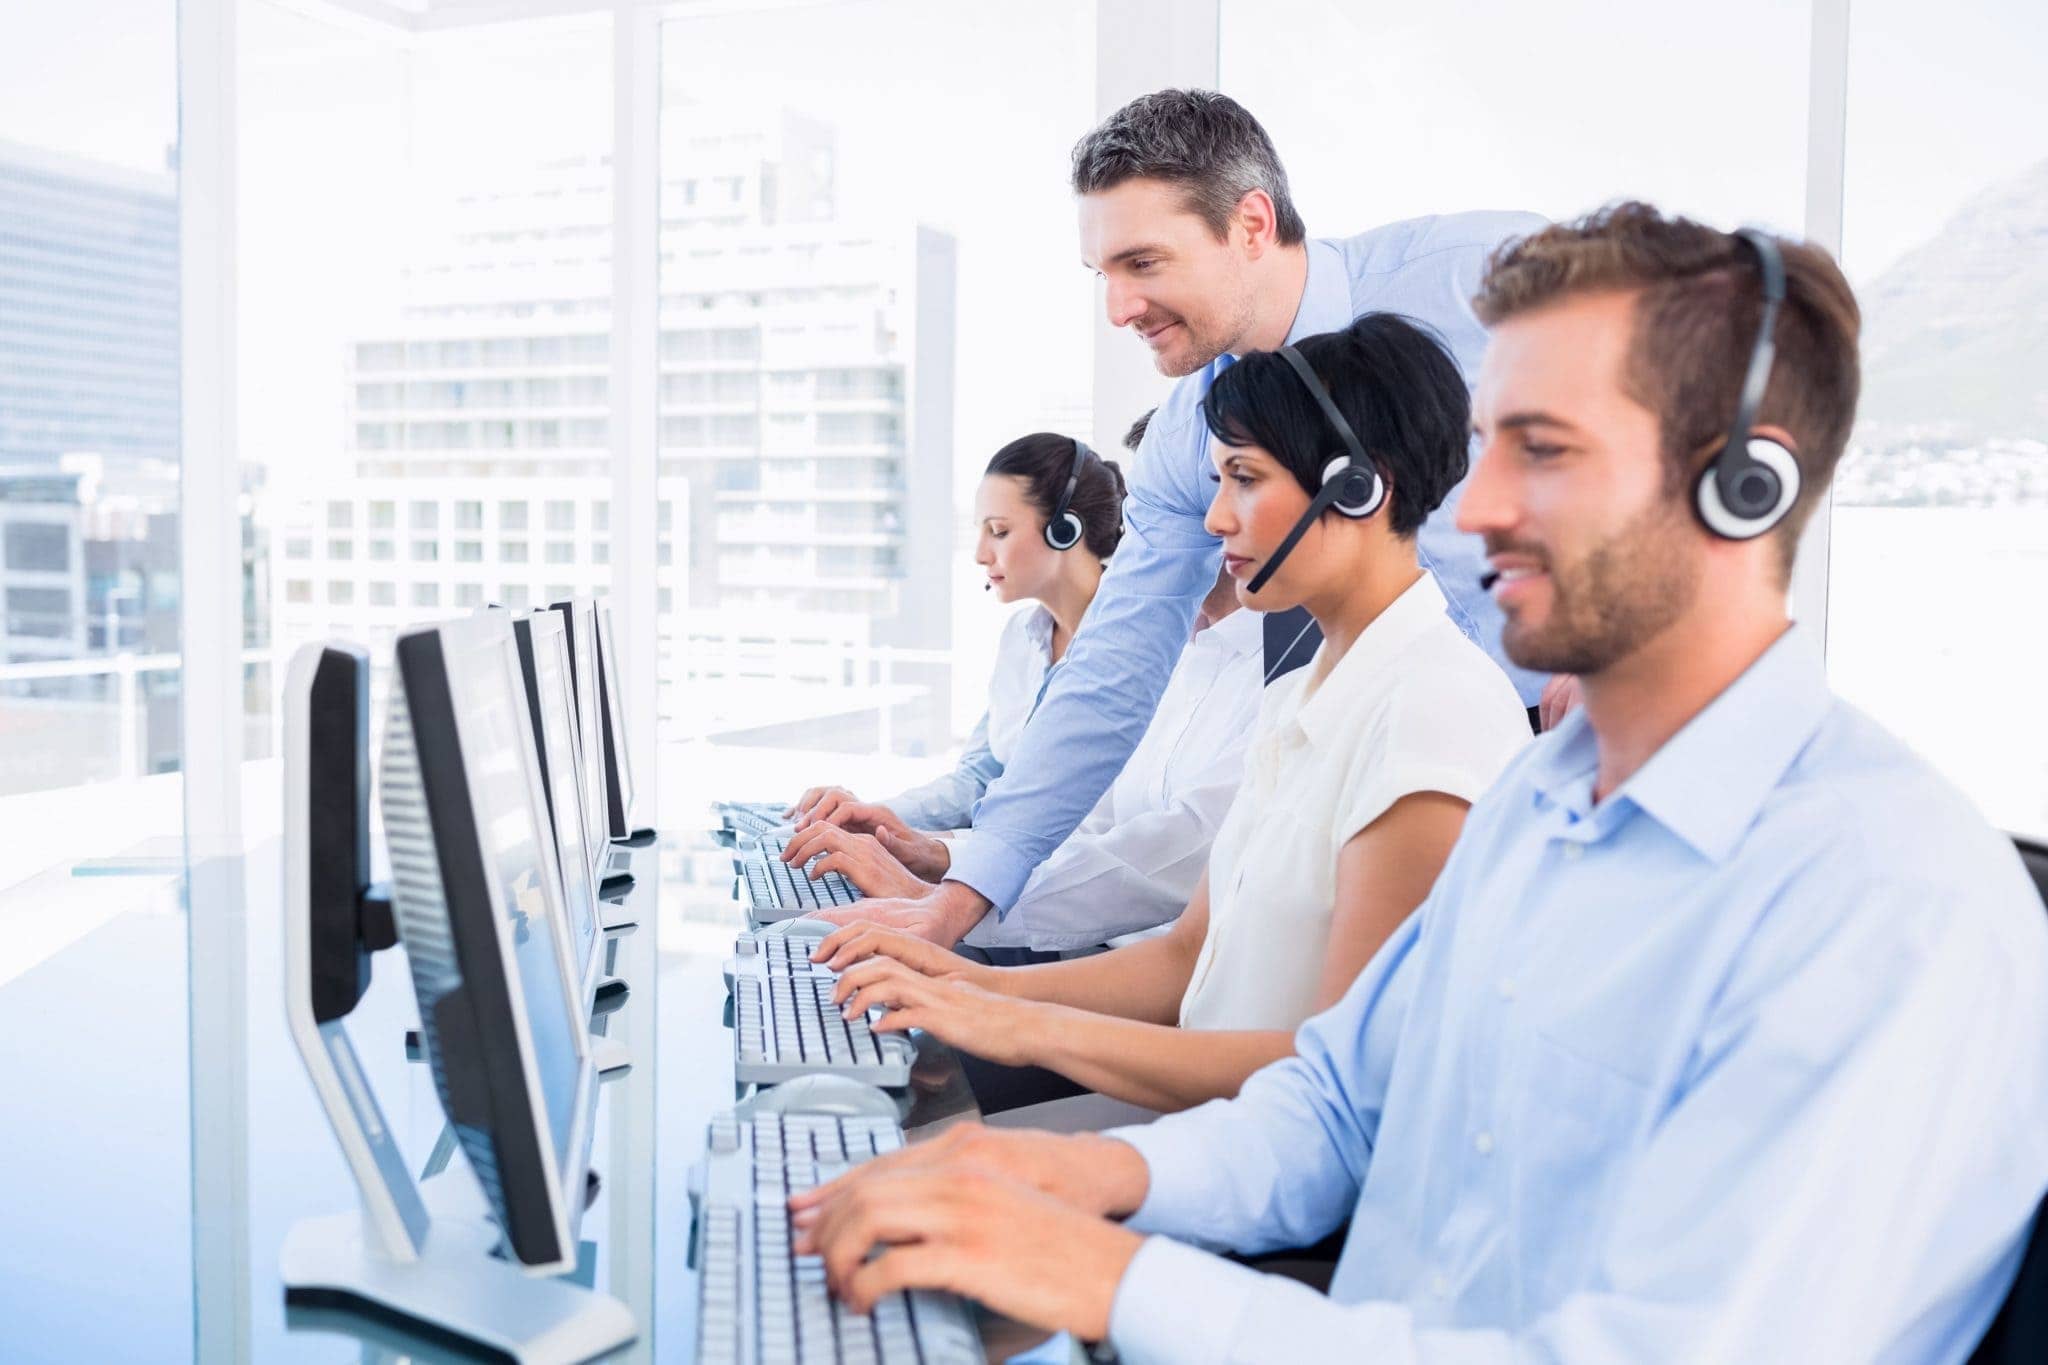 Unified Service Desk first steps with a Call Center application